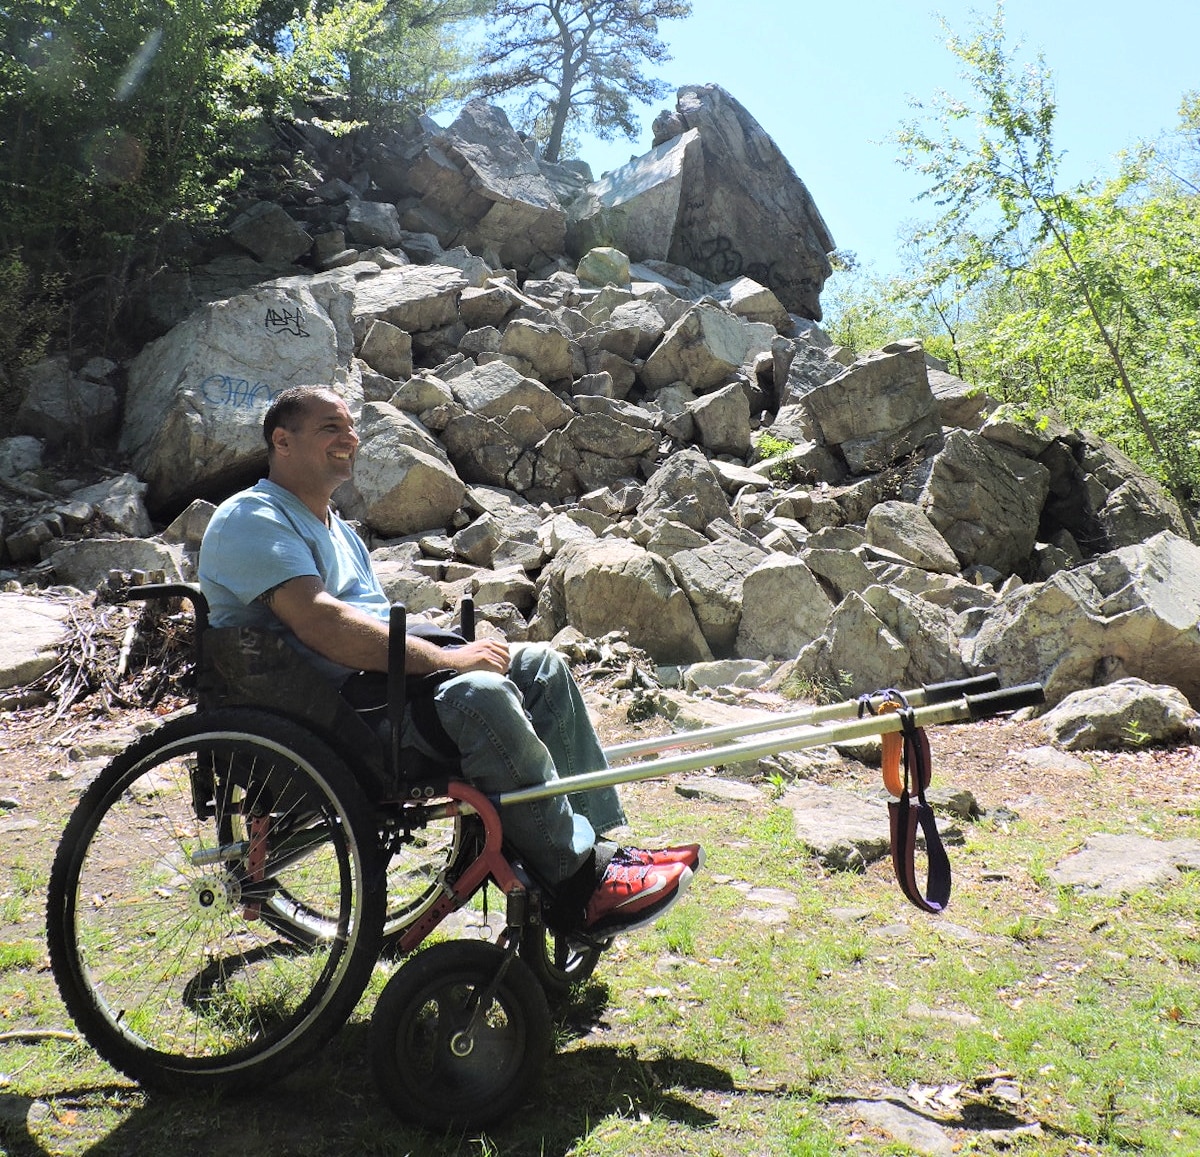 A hiker sits in a Terra Trek wheelchair with rickshaw poles on the front.